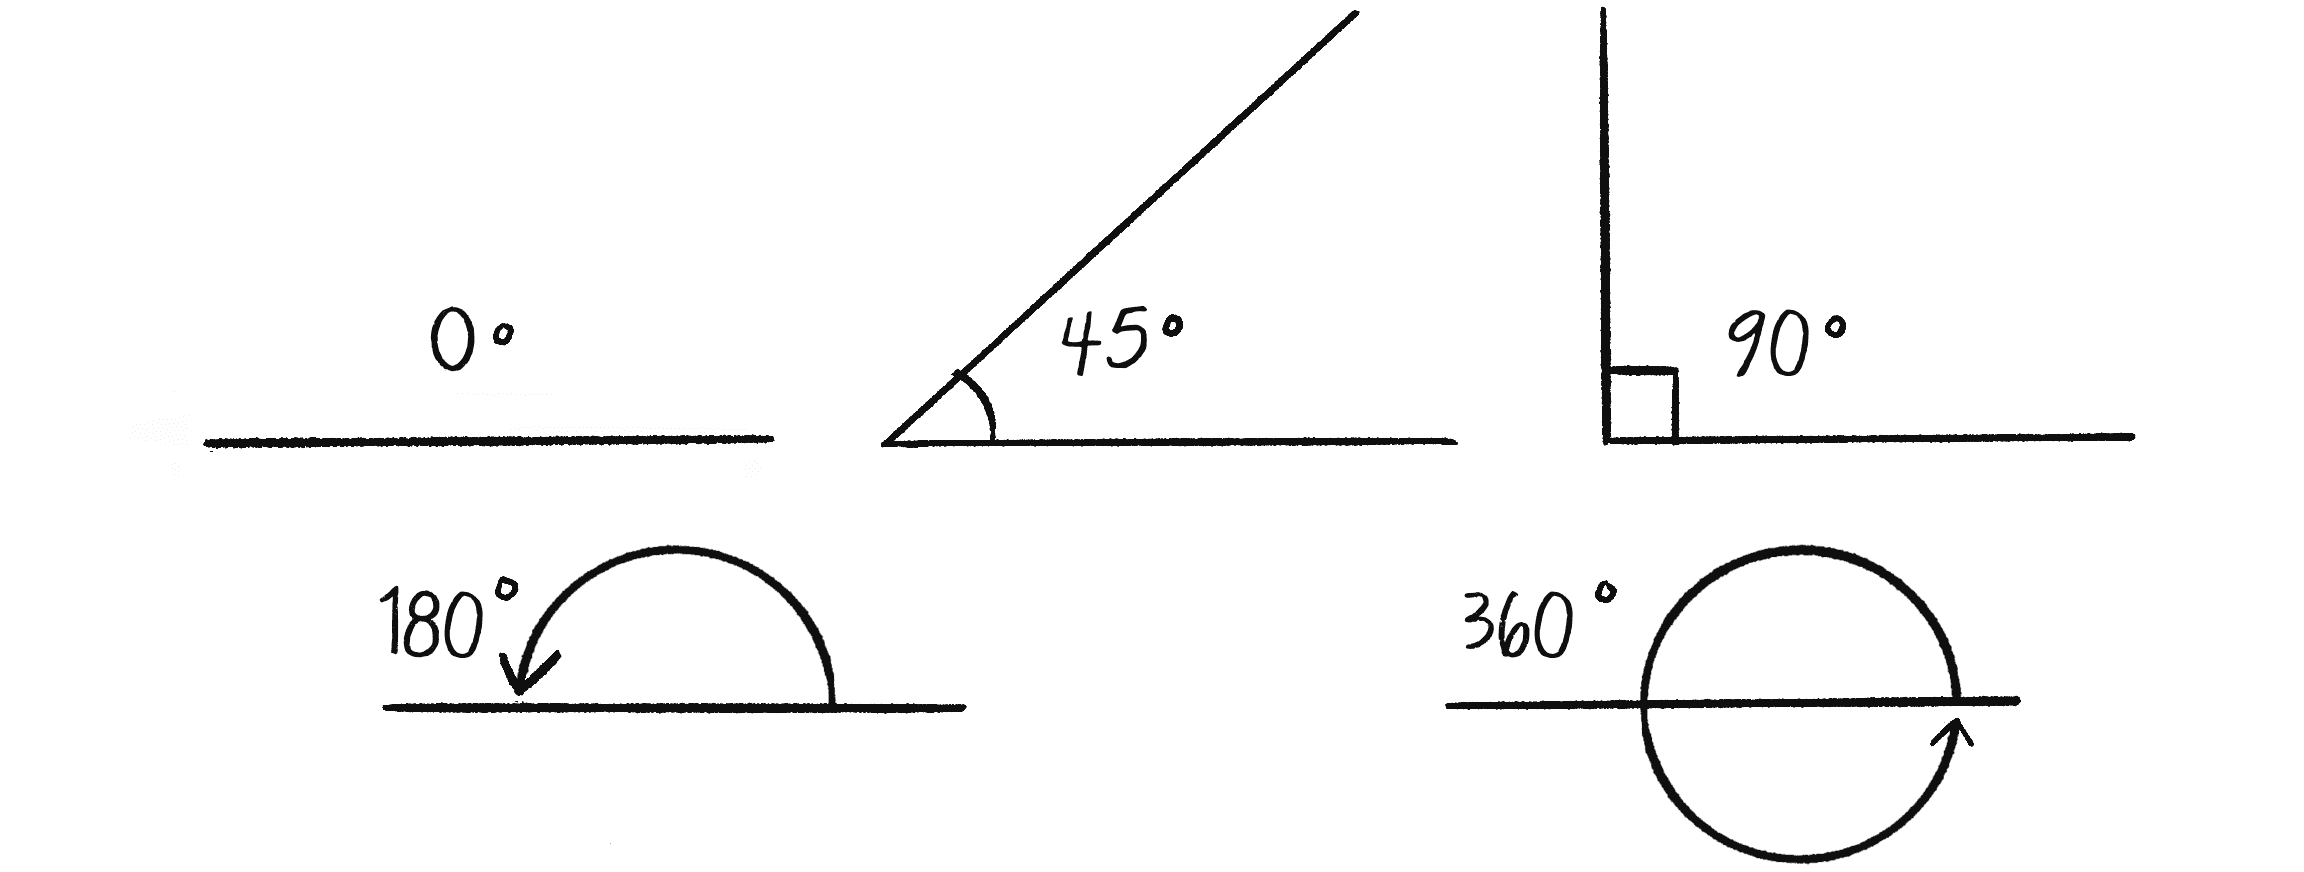 Figure 3.1: Angles measured in degrees